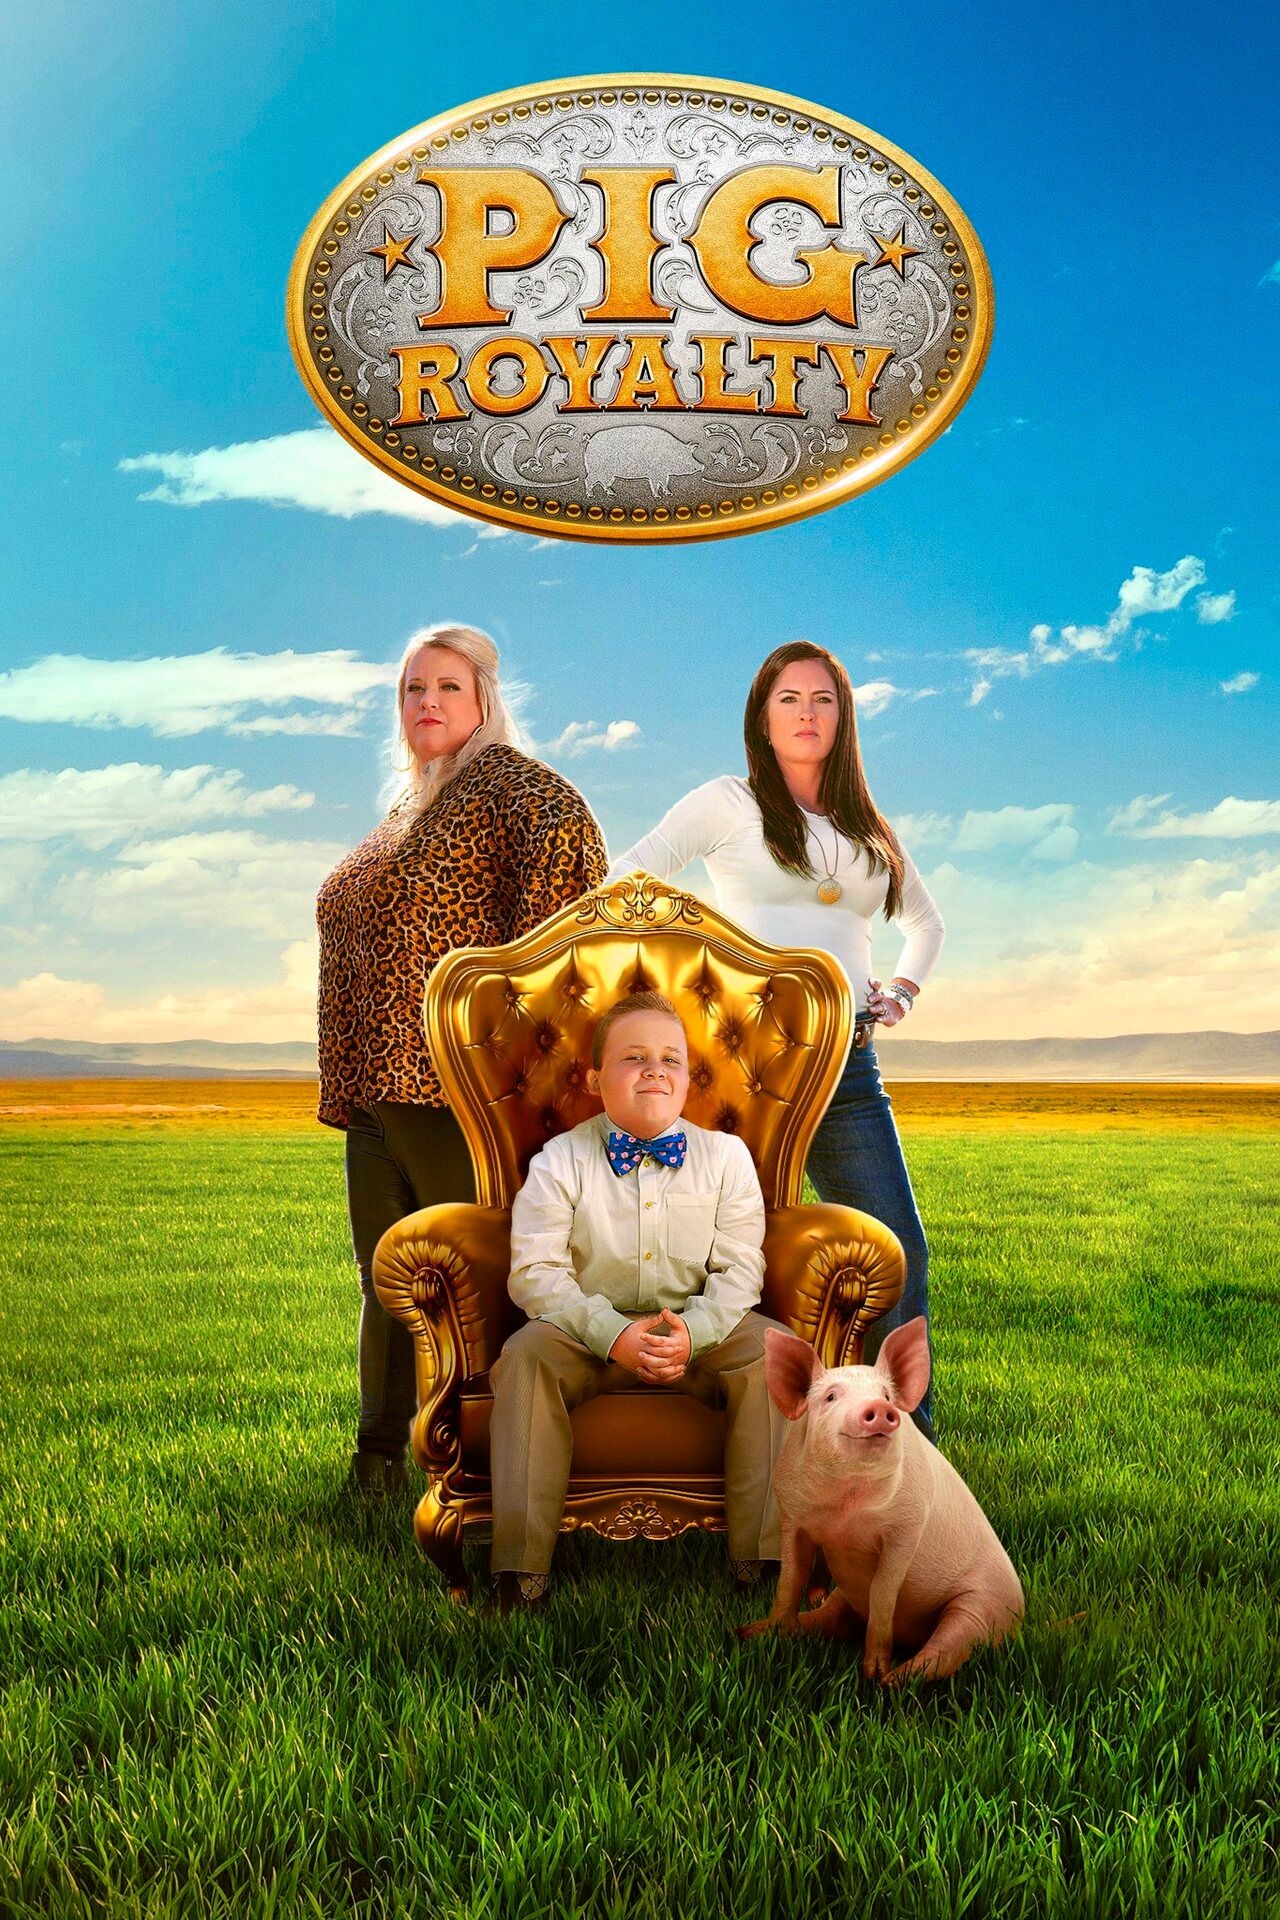 Royalty Gaming Season 1 Episodes Streaming Online for Free, The Roku  Channel